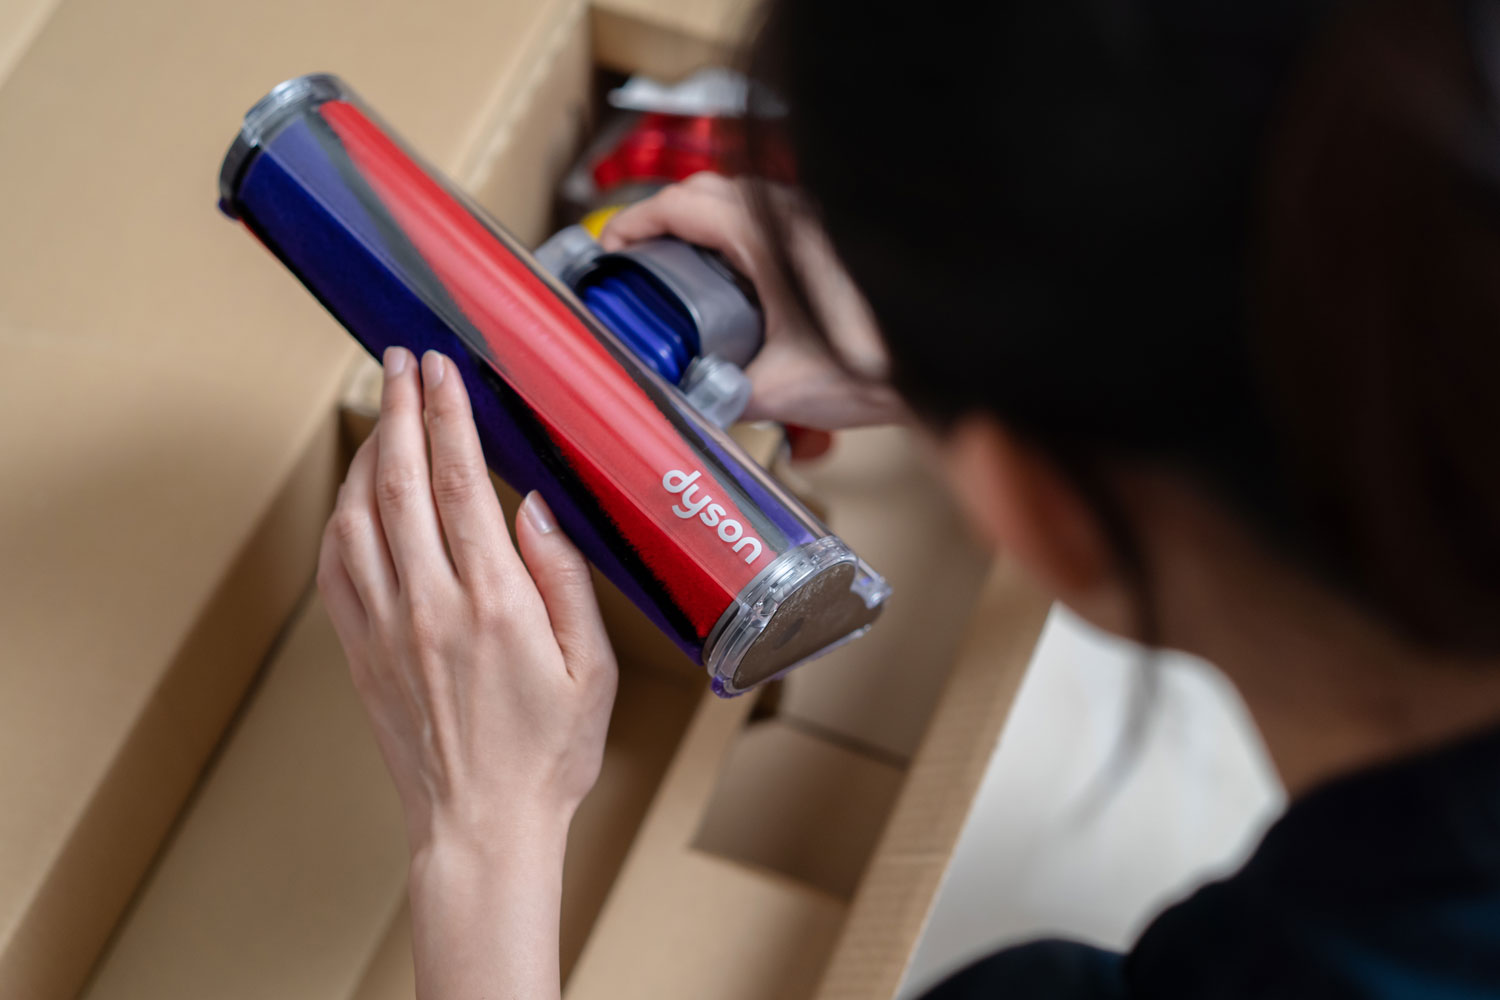 Woman unboxing a brand new Dyson Vacuum